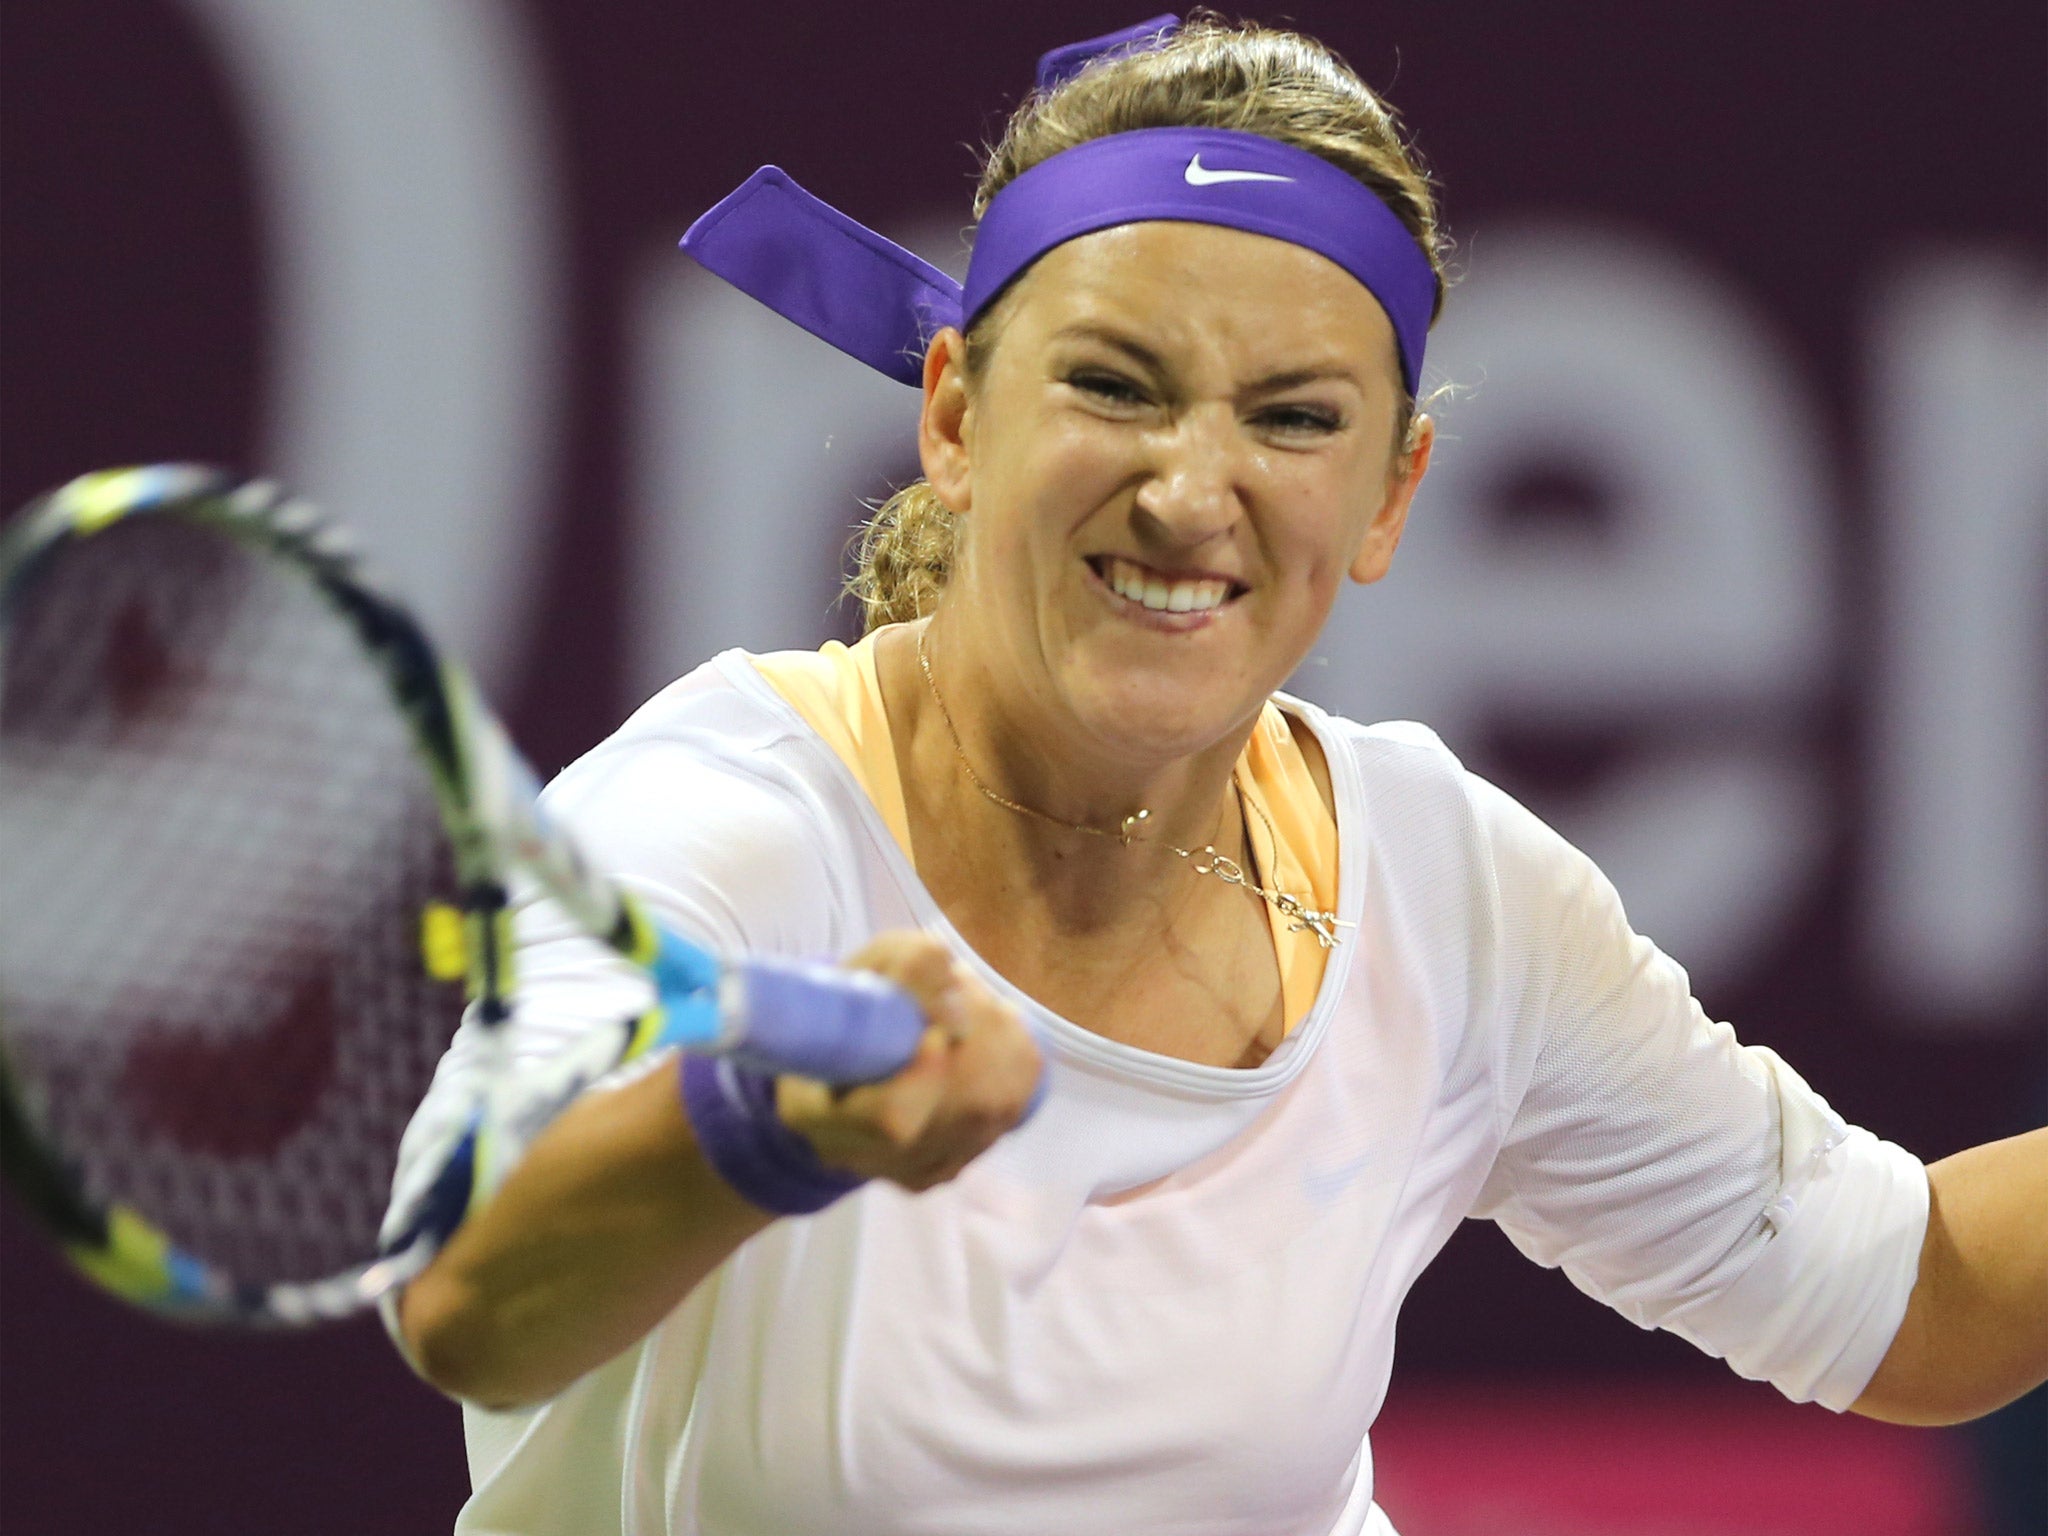 Azarenka: 'The game has become so physical and it takes so much out of you that sometimes you just need a break'